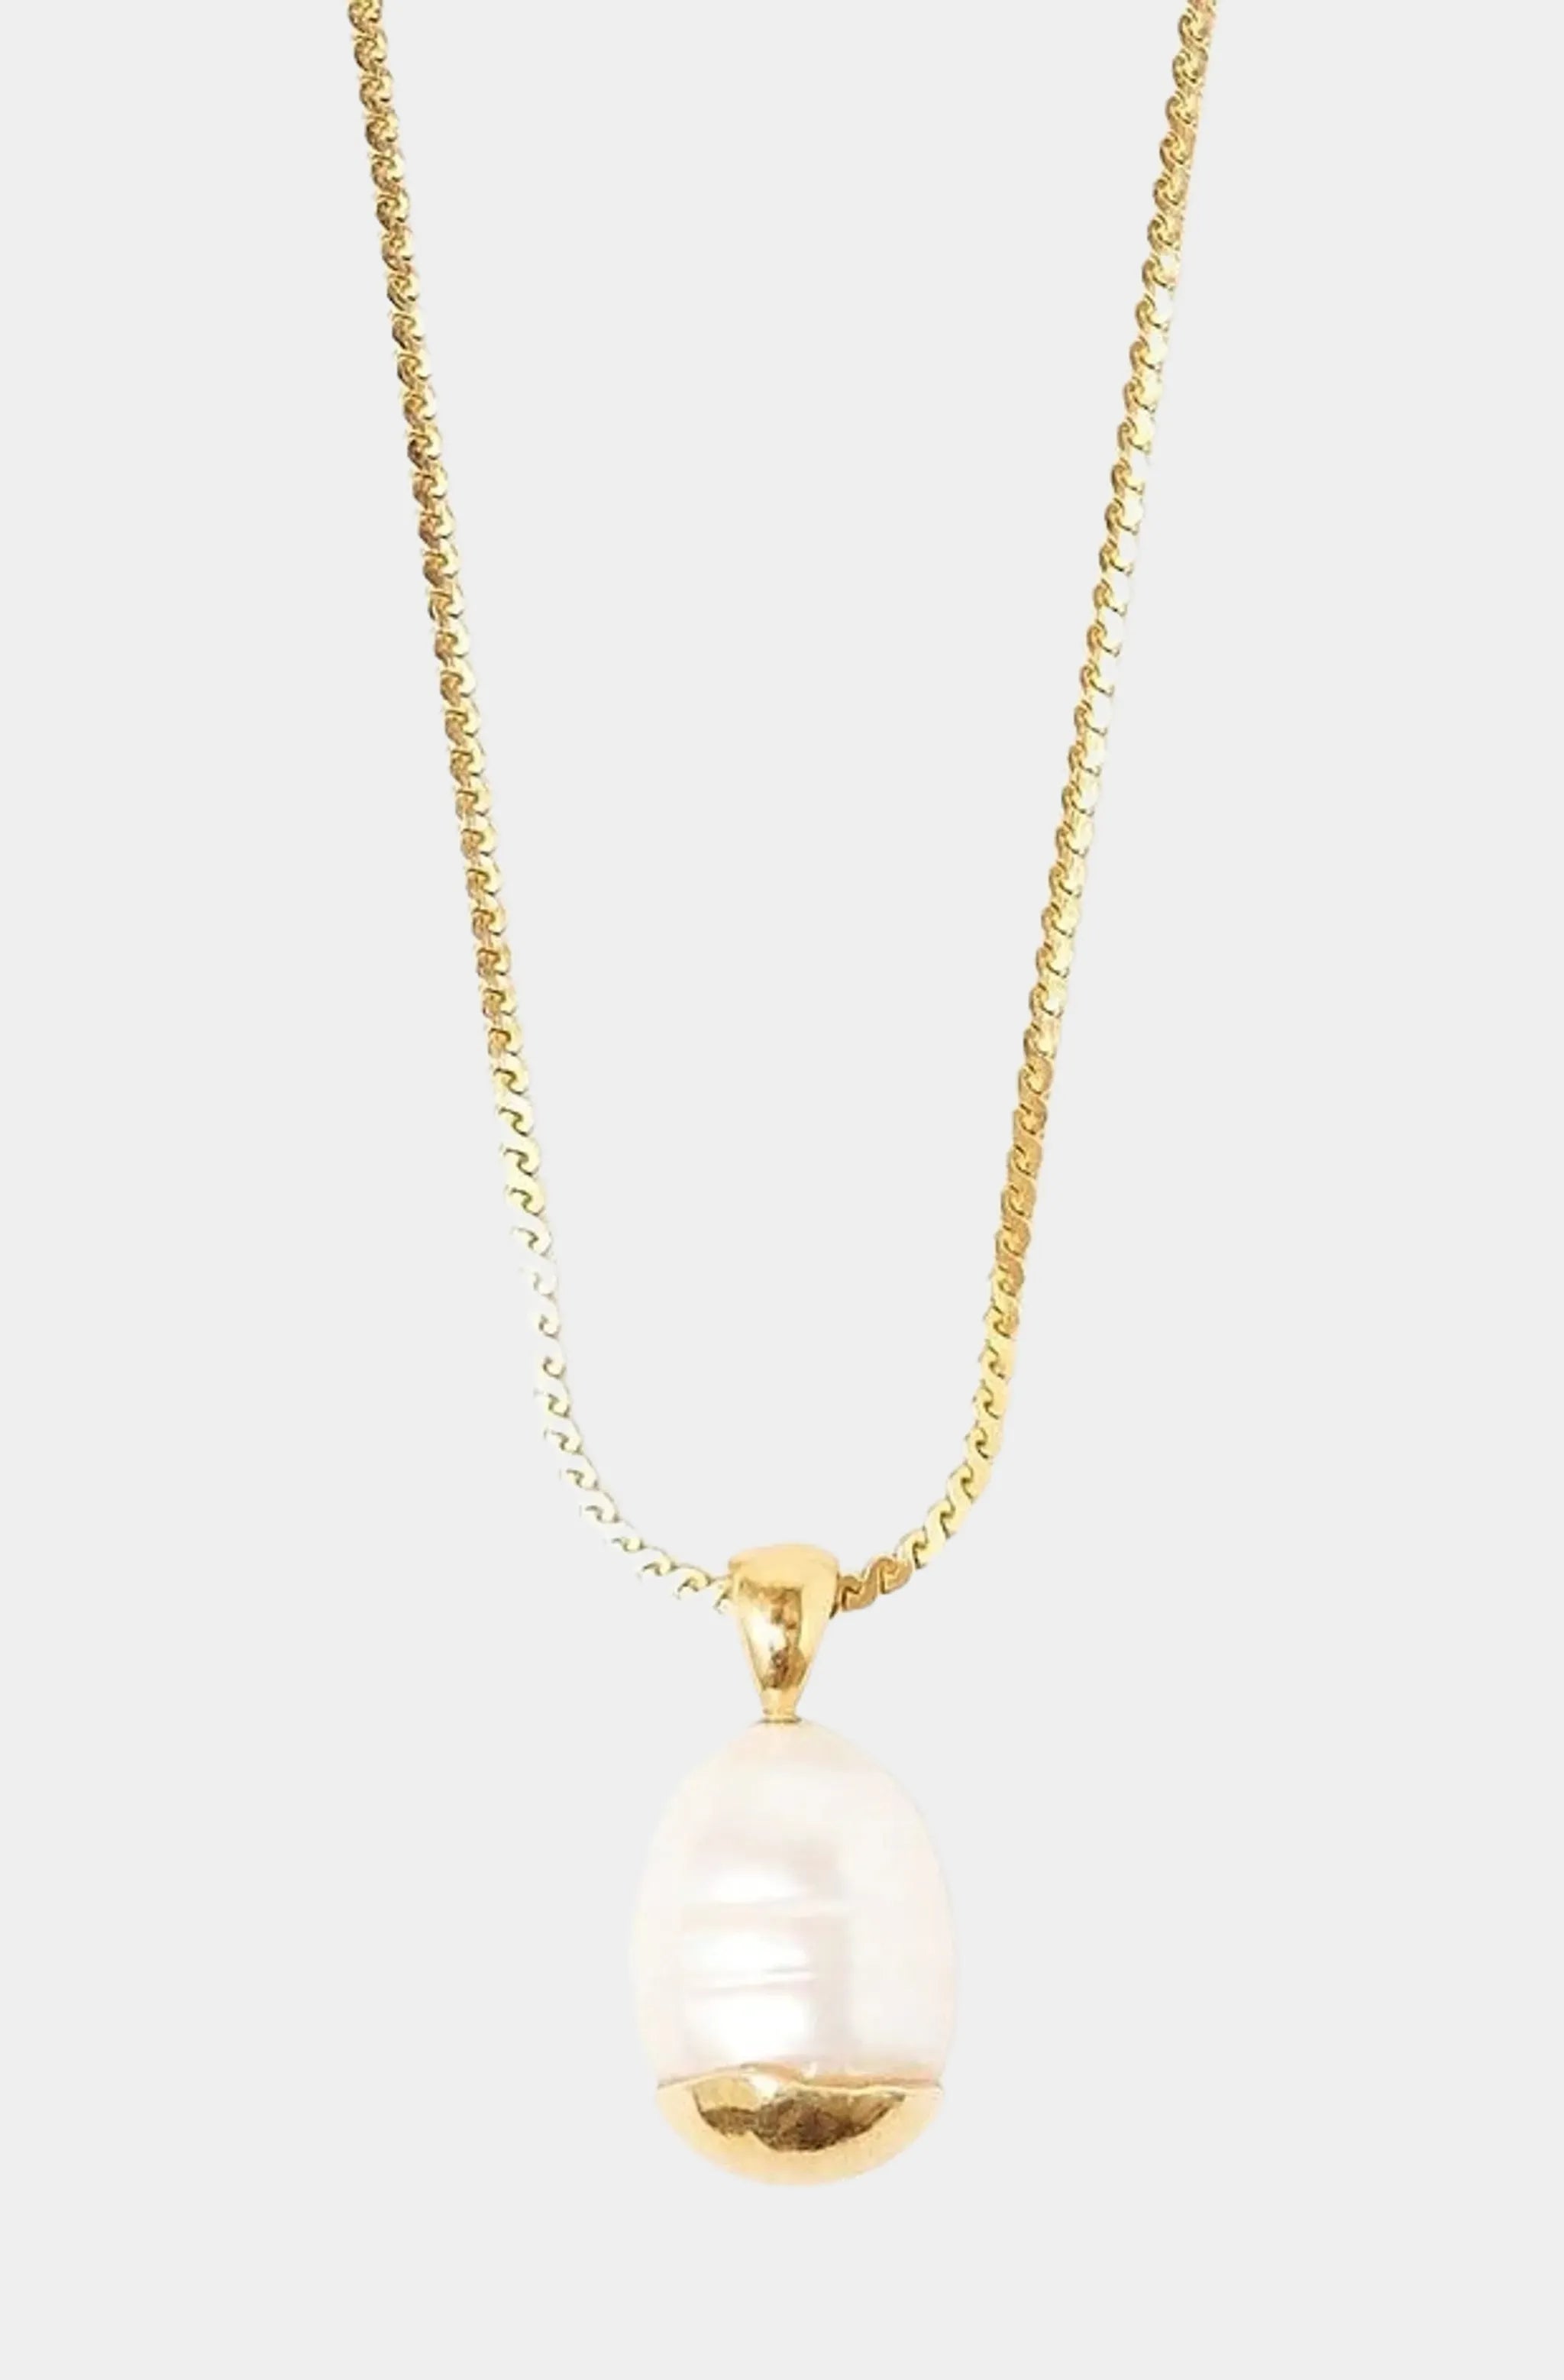 Gold Dipped White Pearl Necklace